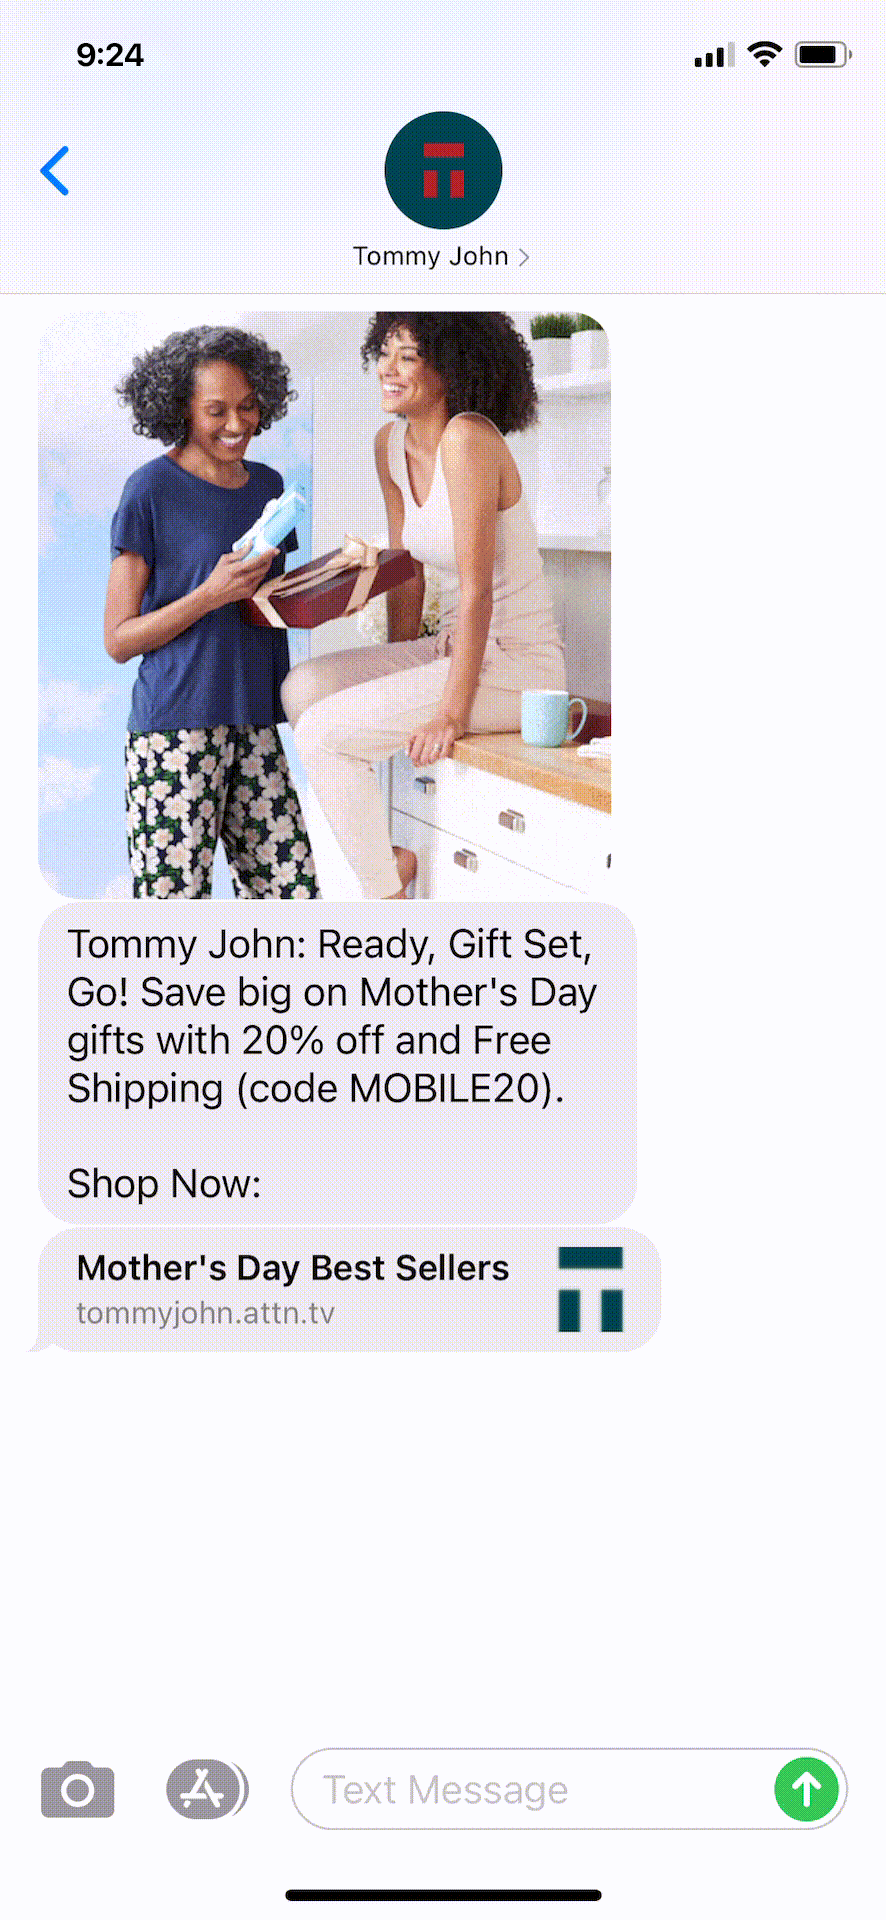 Tommy-John-Text-Message-Marketing-Example-04.30.2021